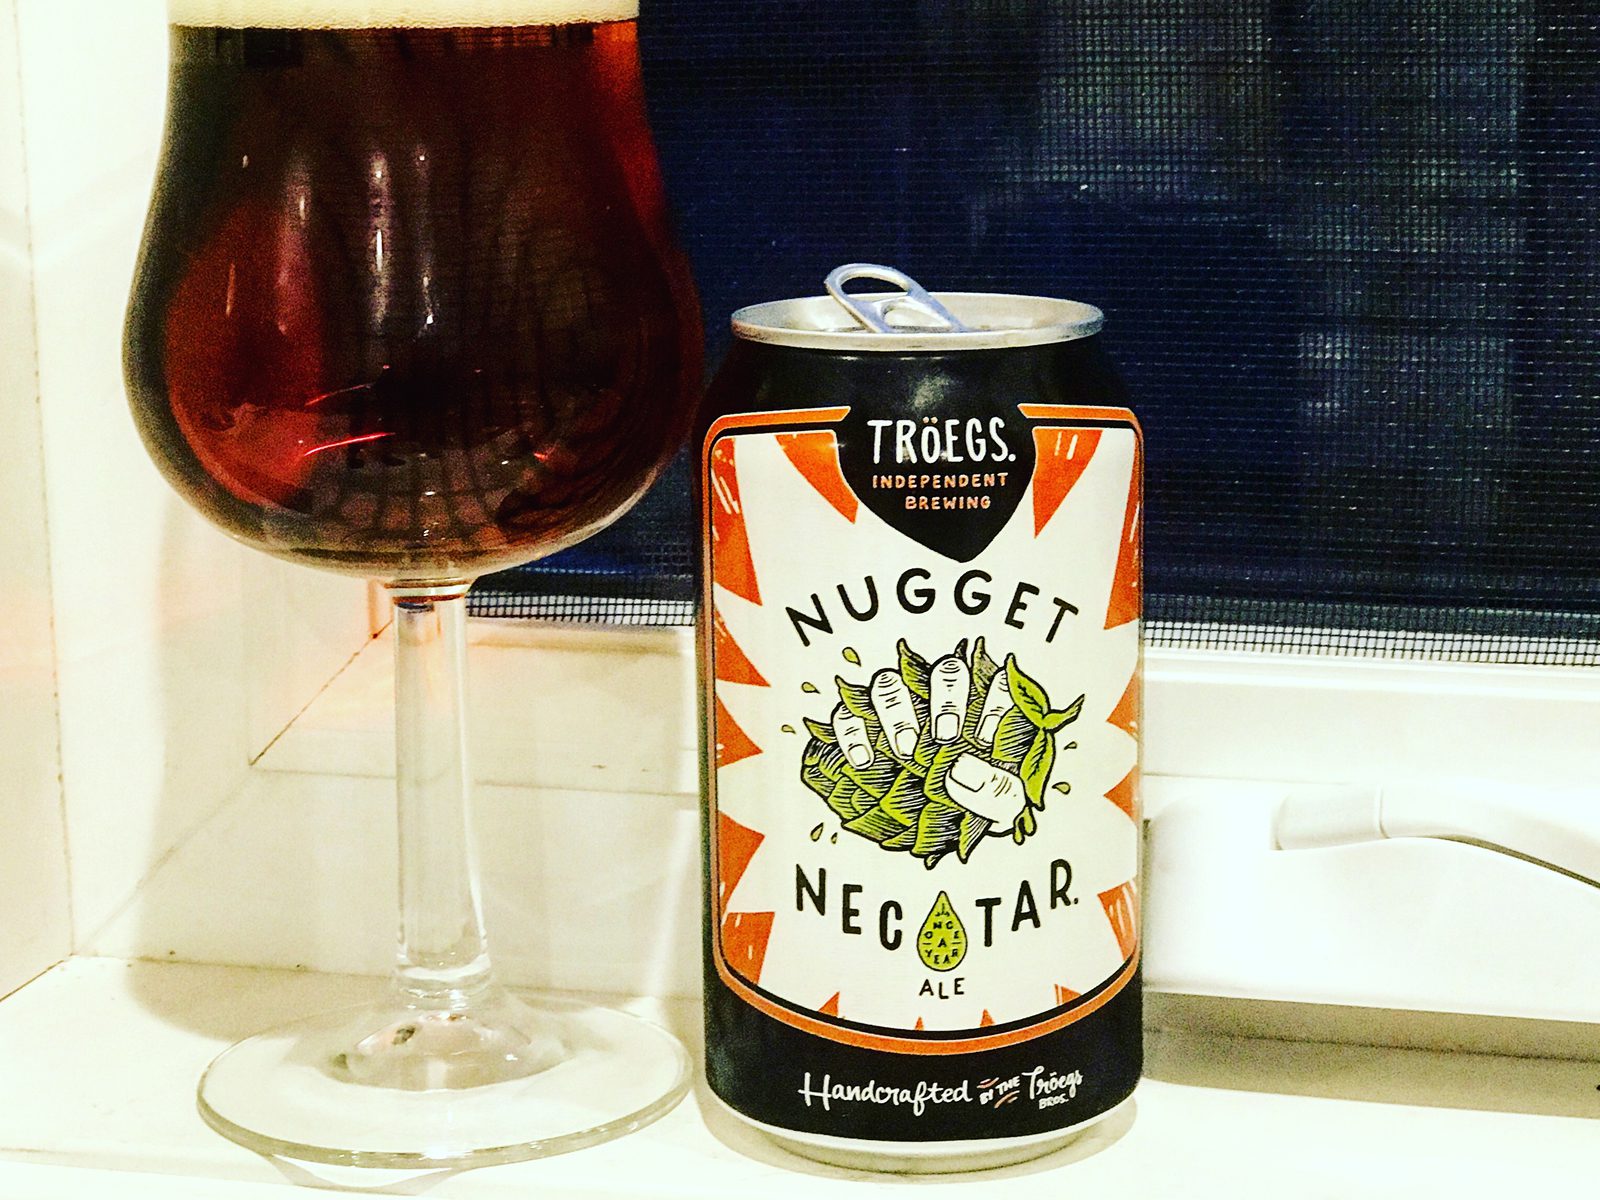 Tröegs Independent Brewing: Nugget Nectar